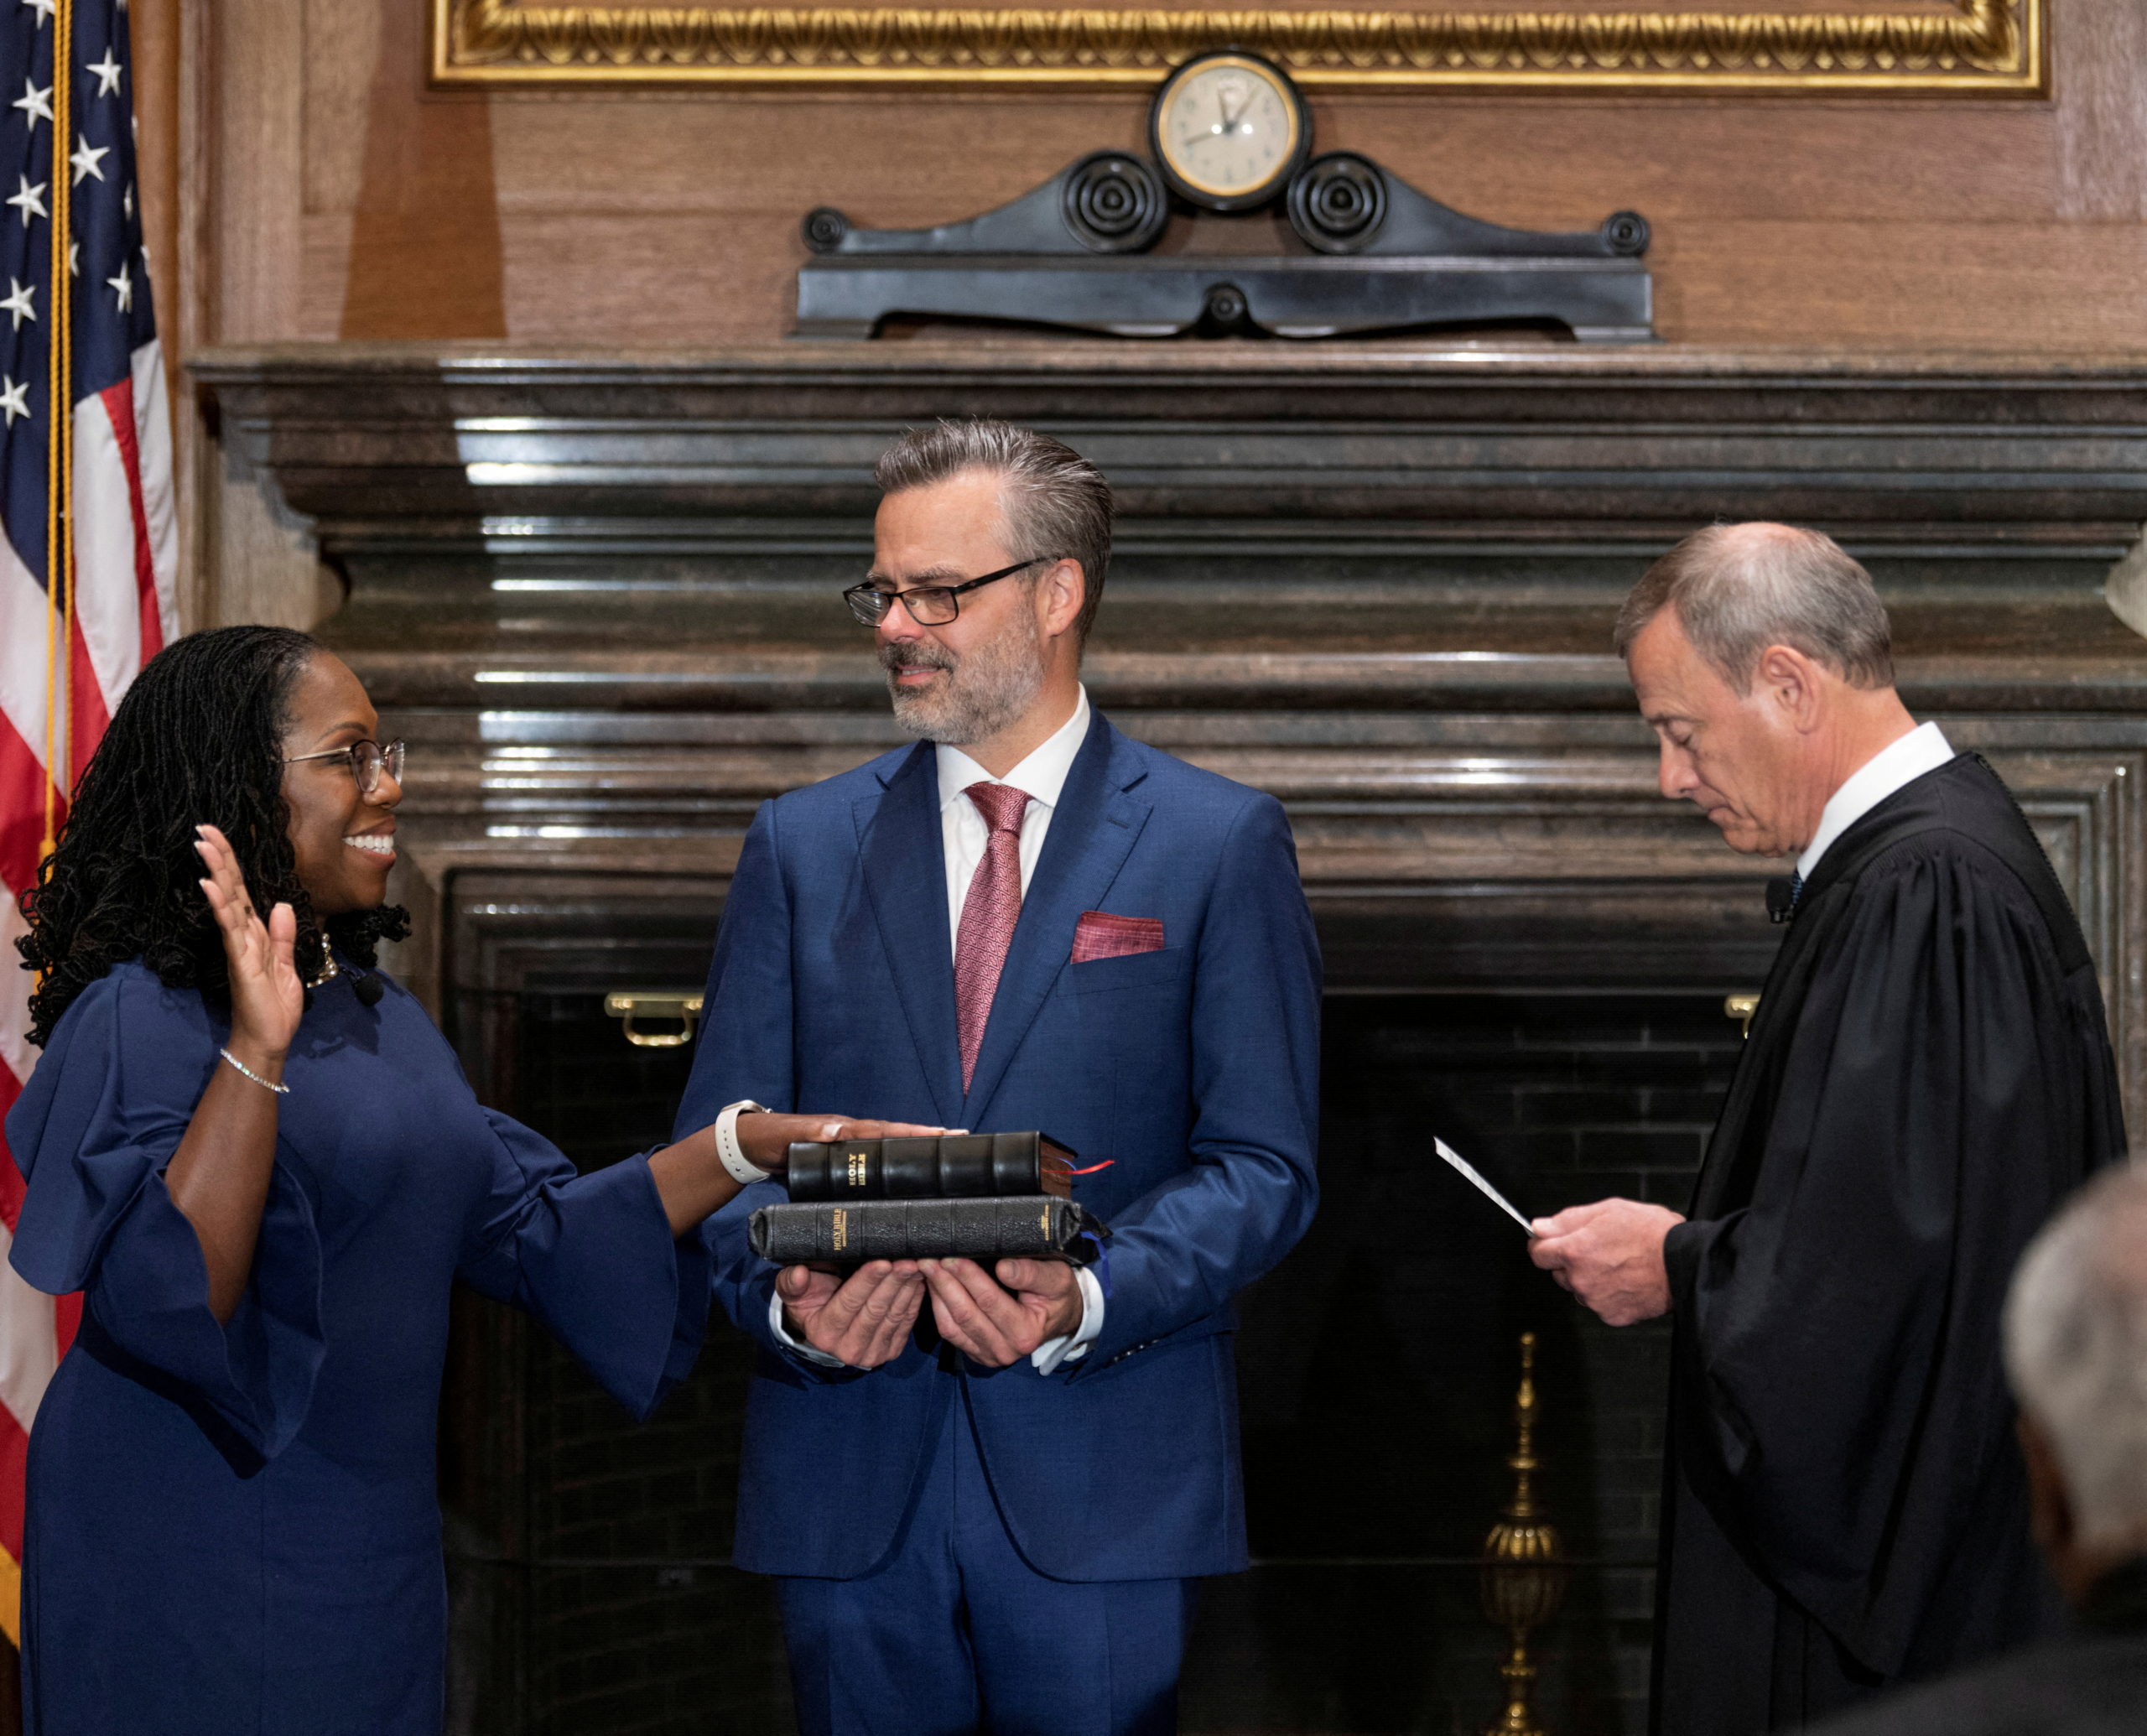 Judge Ketanji Brown Jackson takes her constitutional oath of office as an Associate Justice of the U.S. Supreme Court administered by Chief Justice John Roberts as Jackson’s husband Patrick Jackson holds the Bible in a handout image provided by the U.S. Supreme Court from ceremonies held at the Supreme Court building in Washington, U.S., June 30, 2022. Fred Schilling/Collection of the Supreme Court of the United States/Handout via Reuters